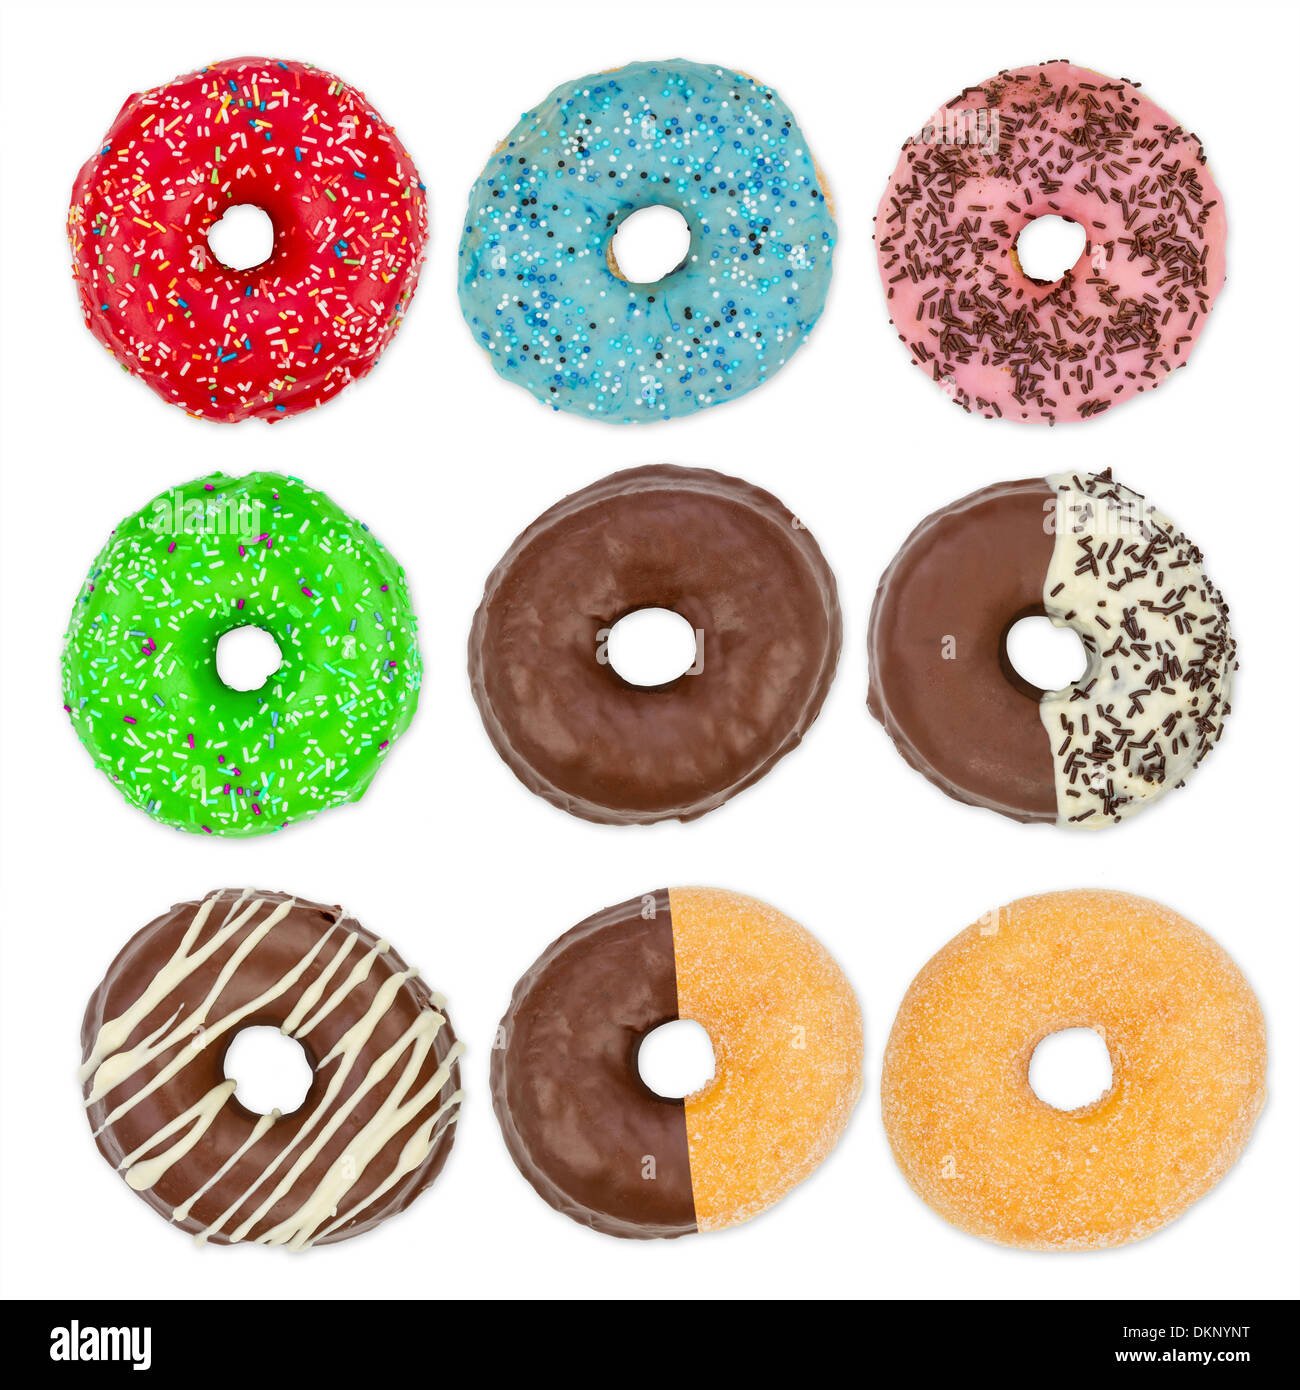 Coloful jeu donut in front of white background Banque D'Images